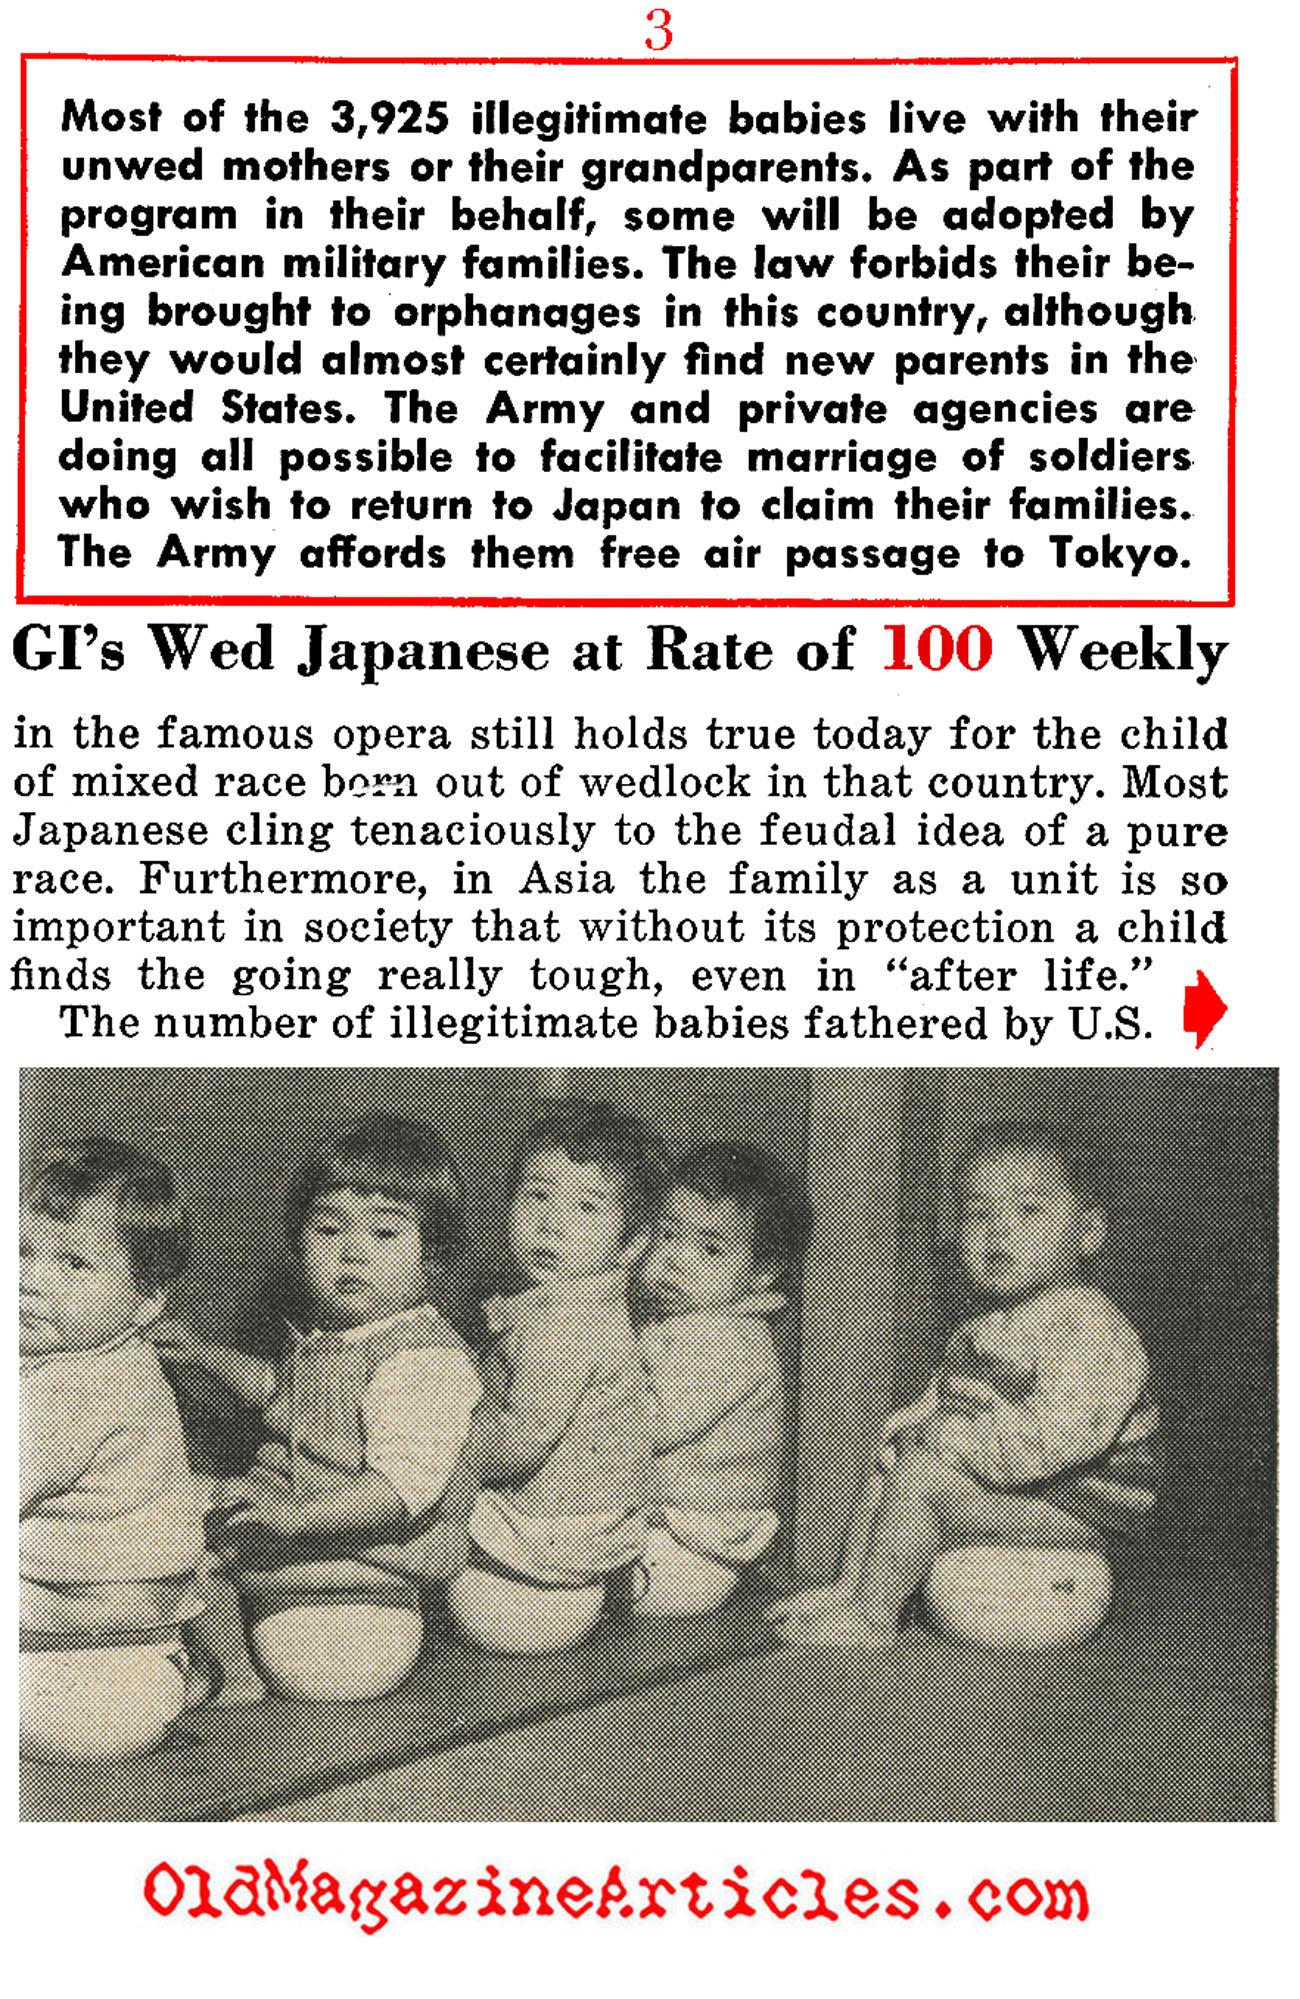 The War-Babies of Occupied Japan (People Today Magazine, 1954)